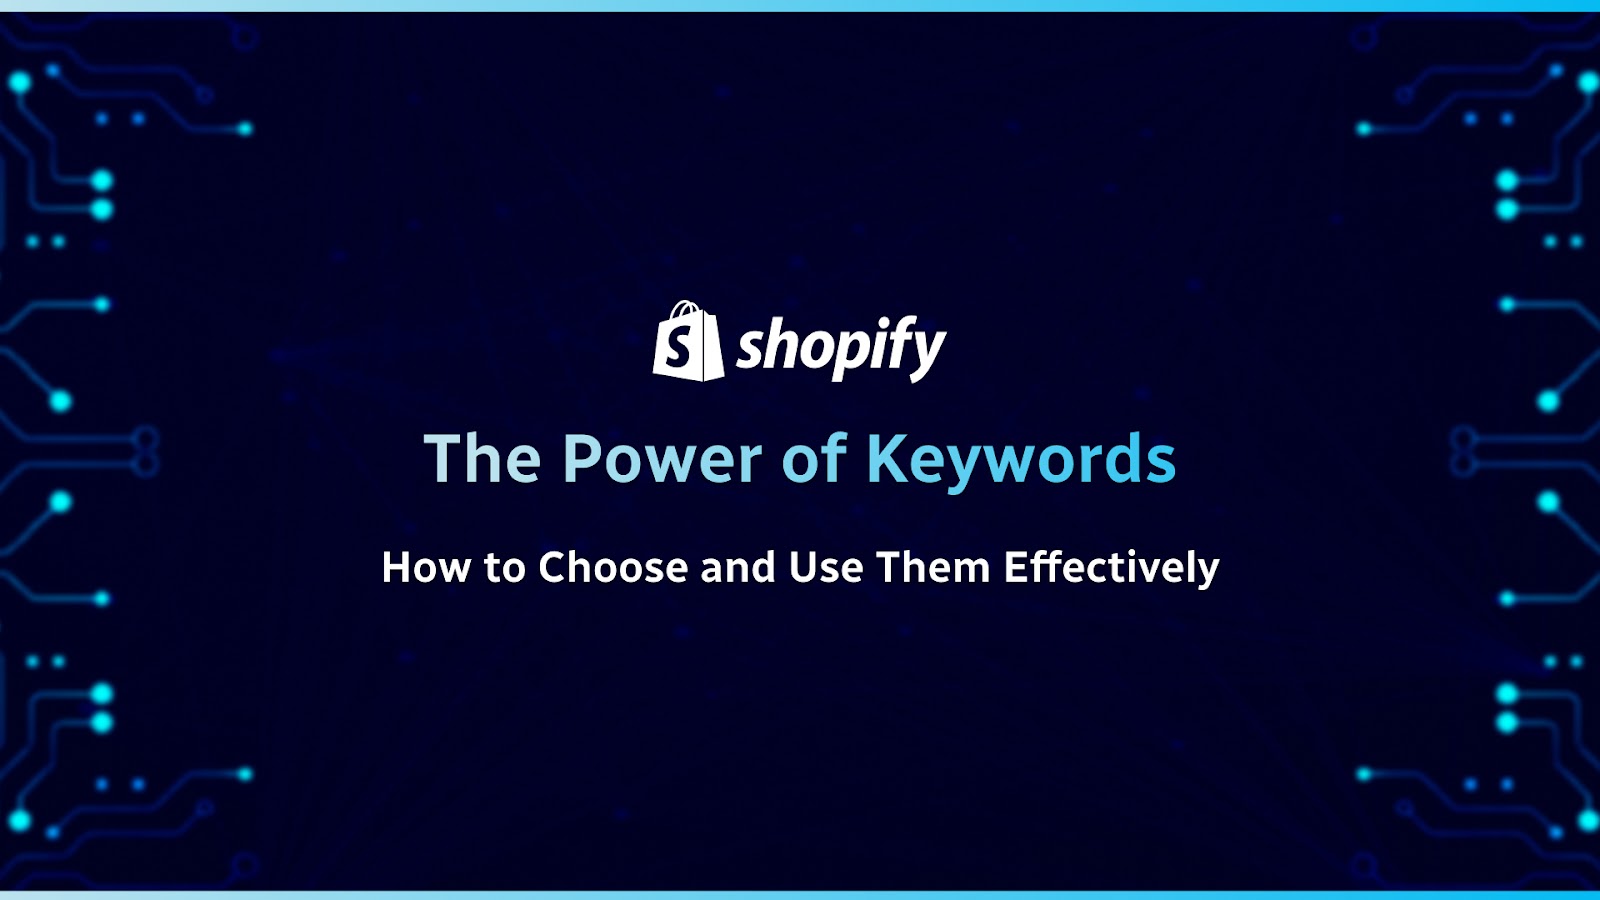 The Power of Keywords: How to Choose and Use Them Effectively